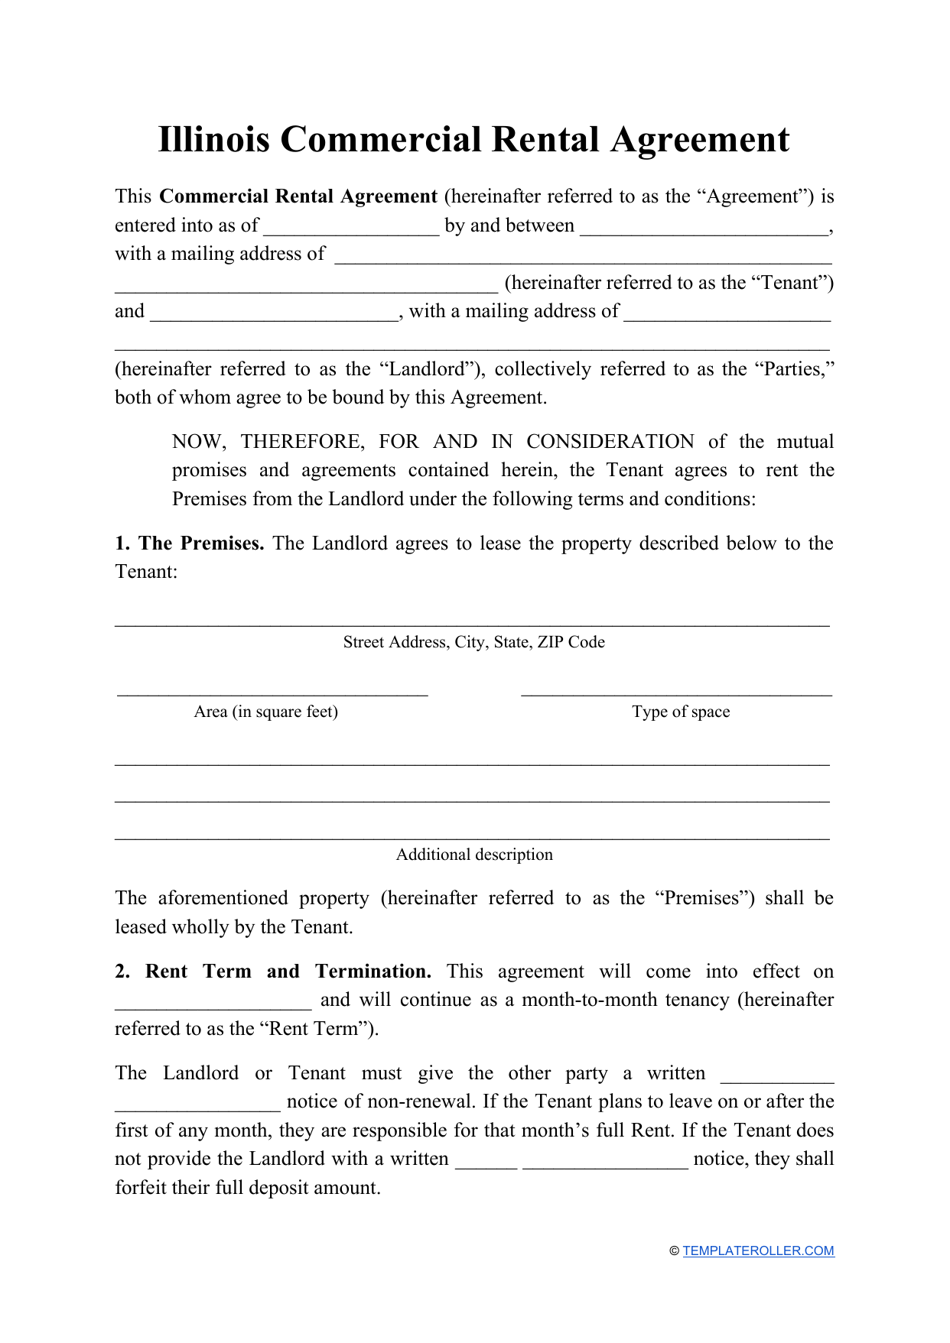 Commercial Rental Agreement Template - Illinois, Page 1